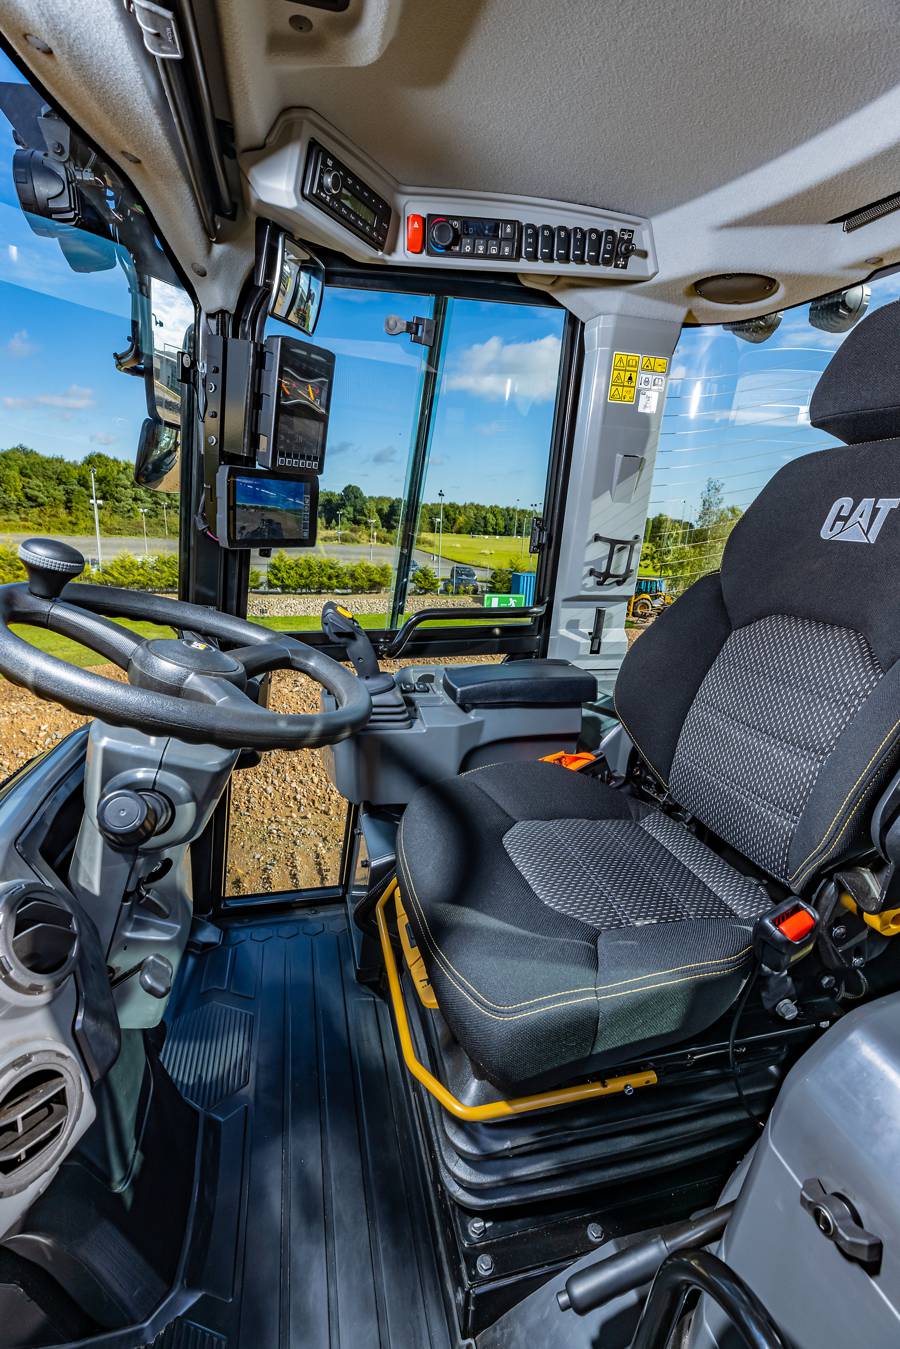 Cat unveils feature packed 906, 907 and 908 Compact Wheel Loaders